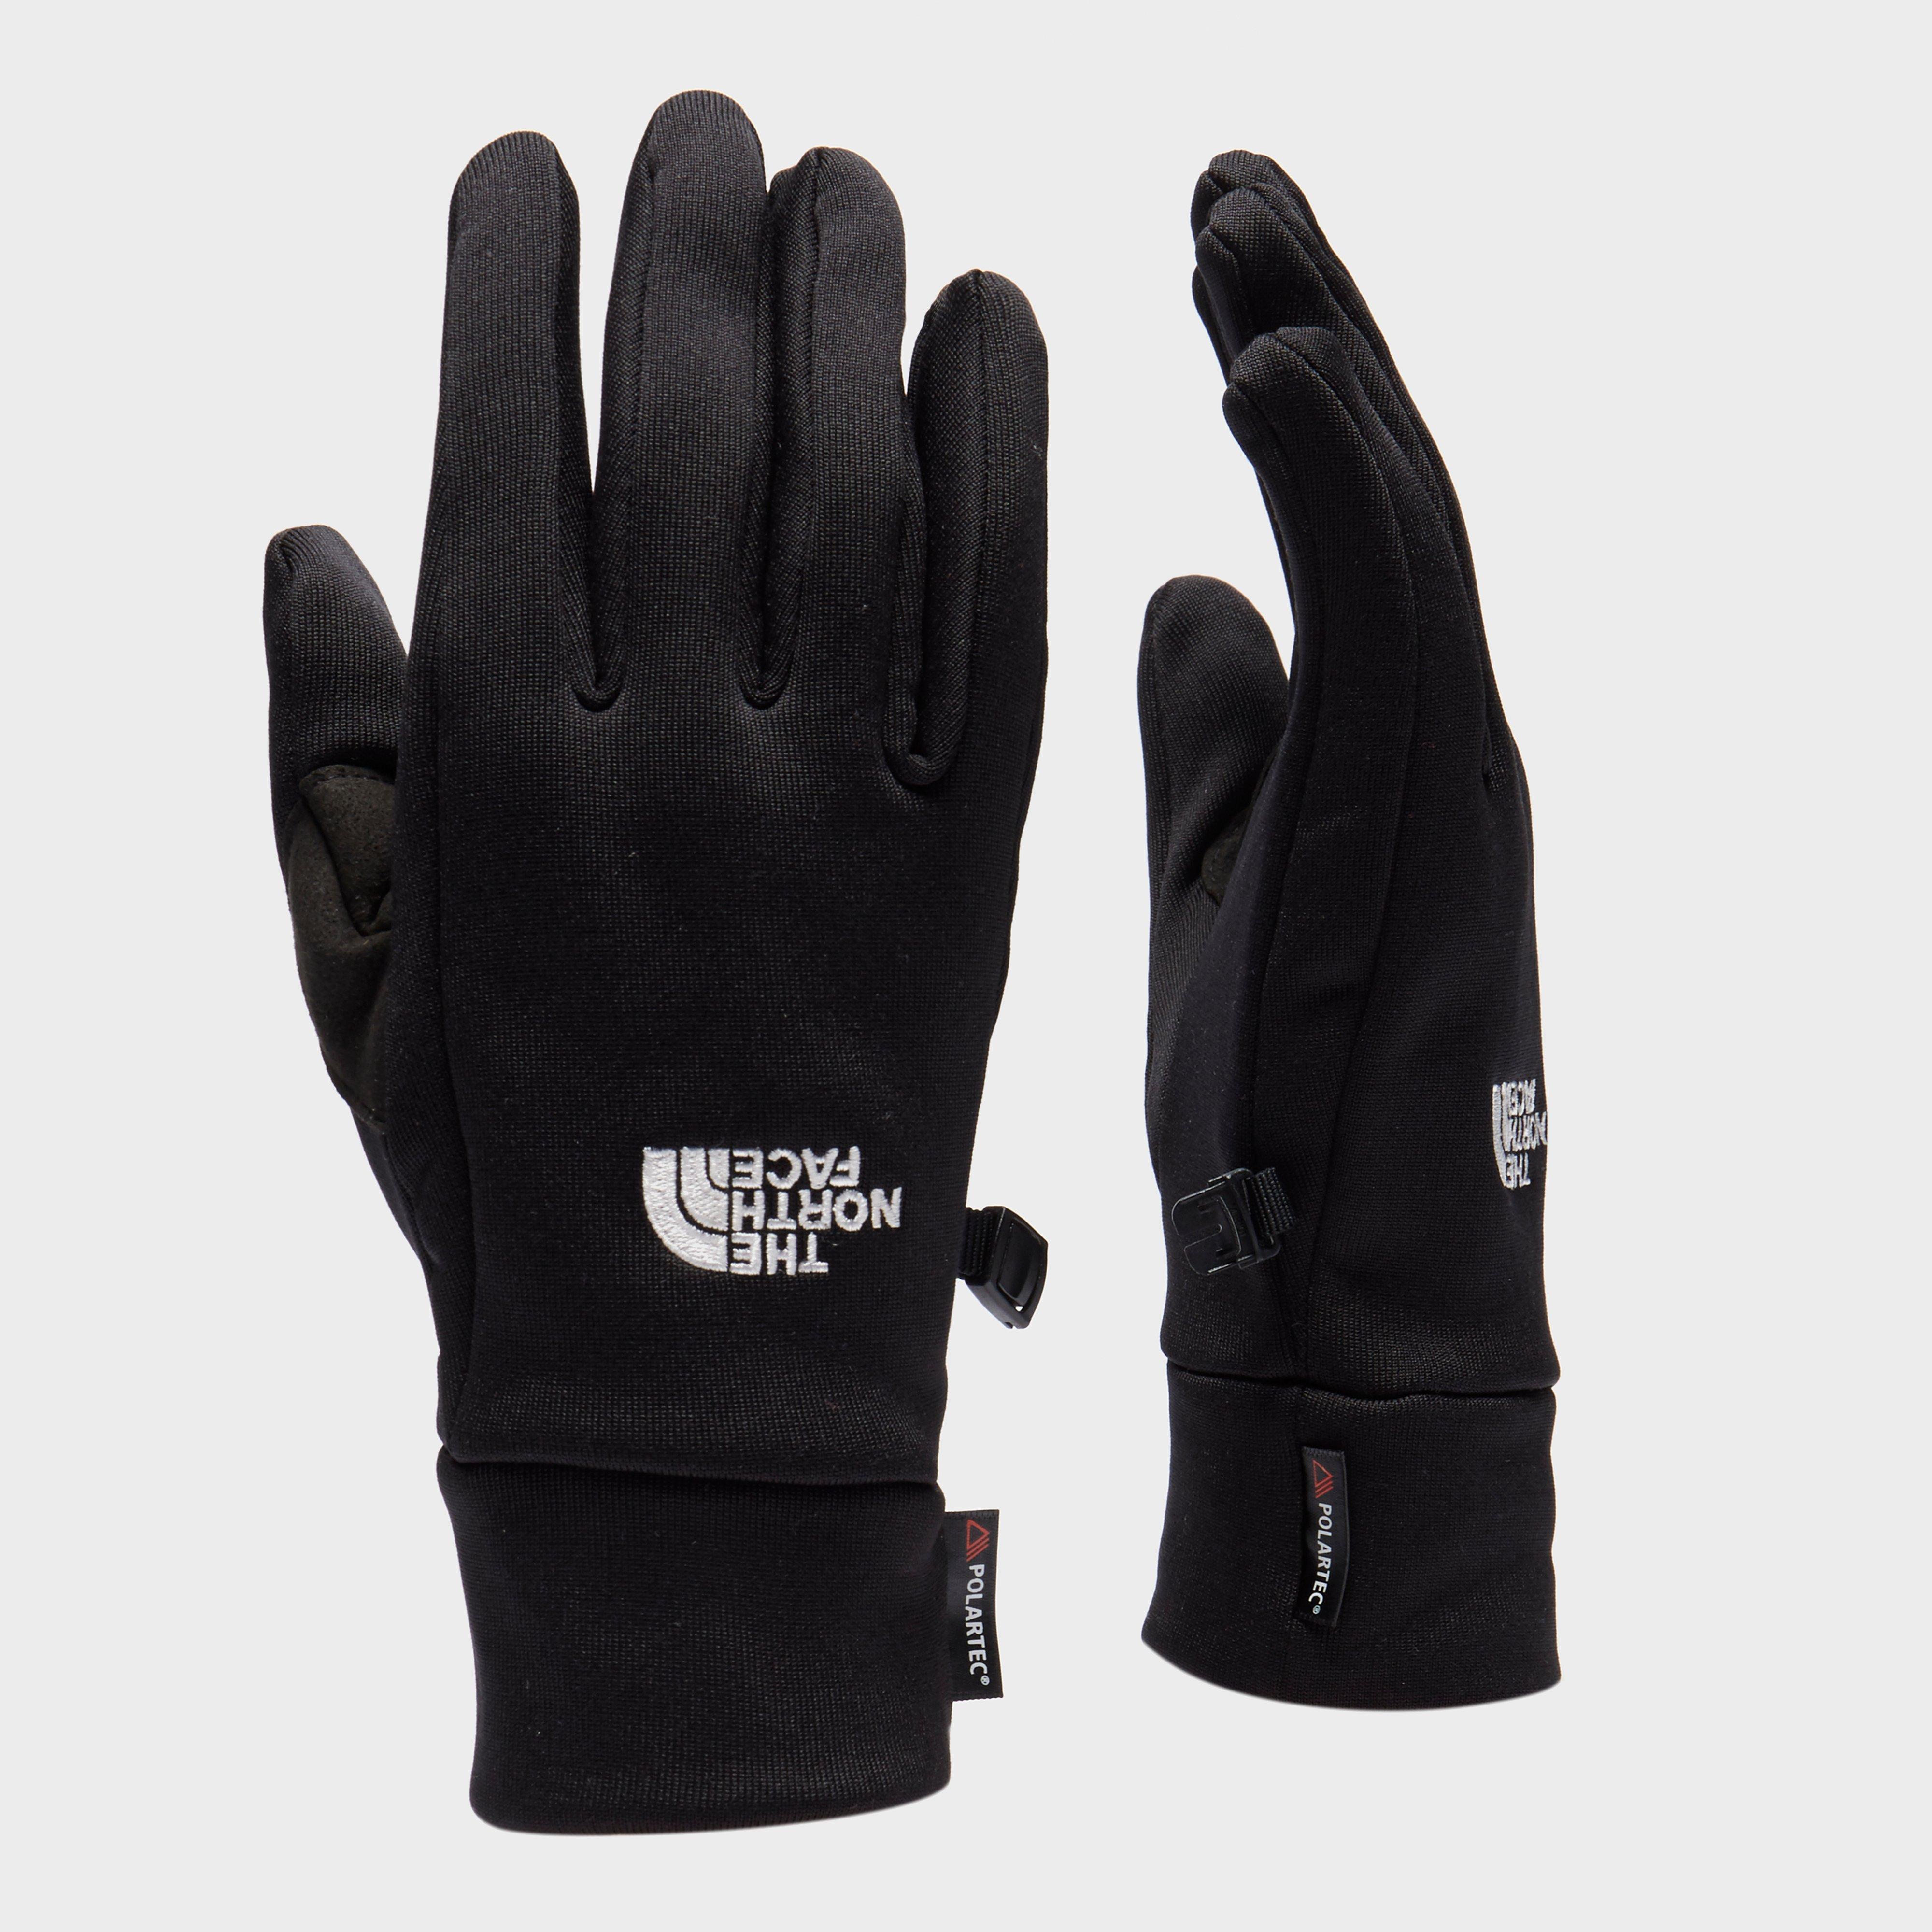 north face power stretch glove